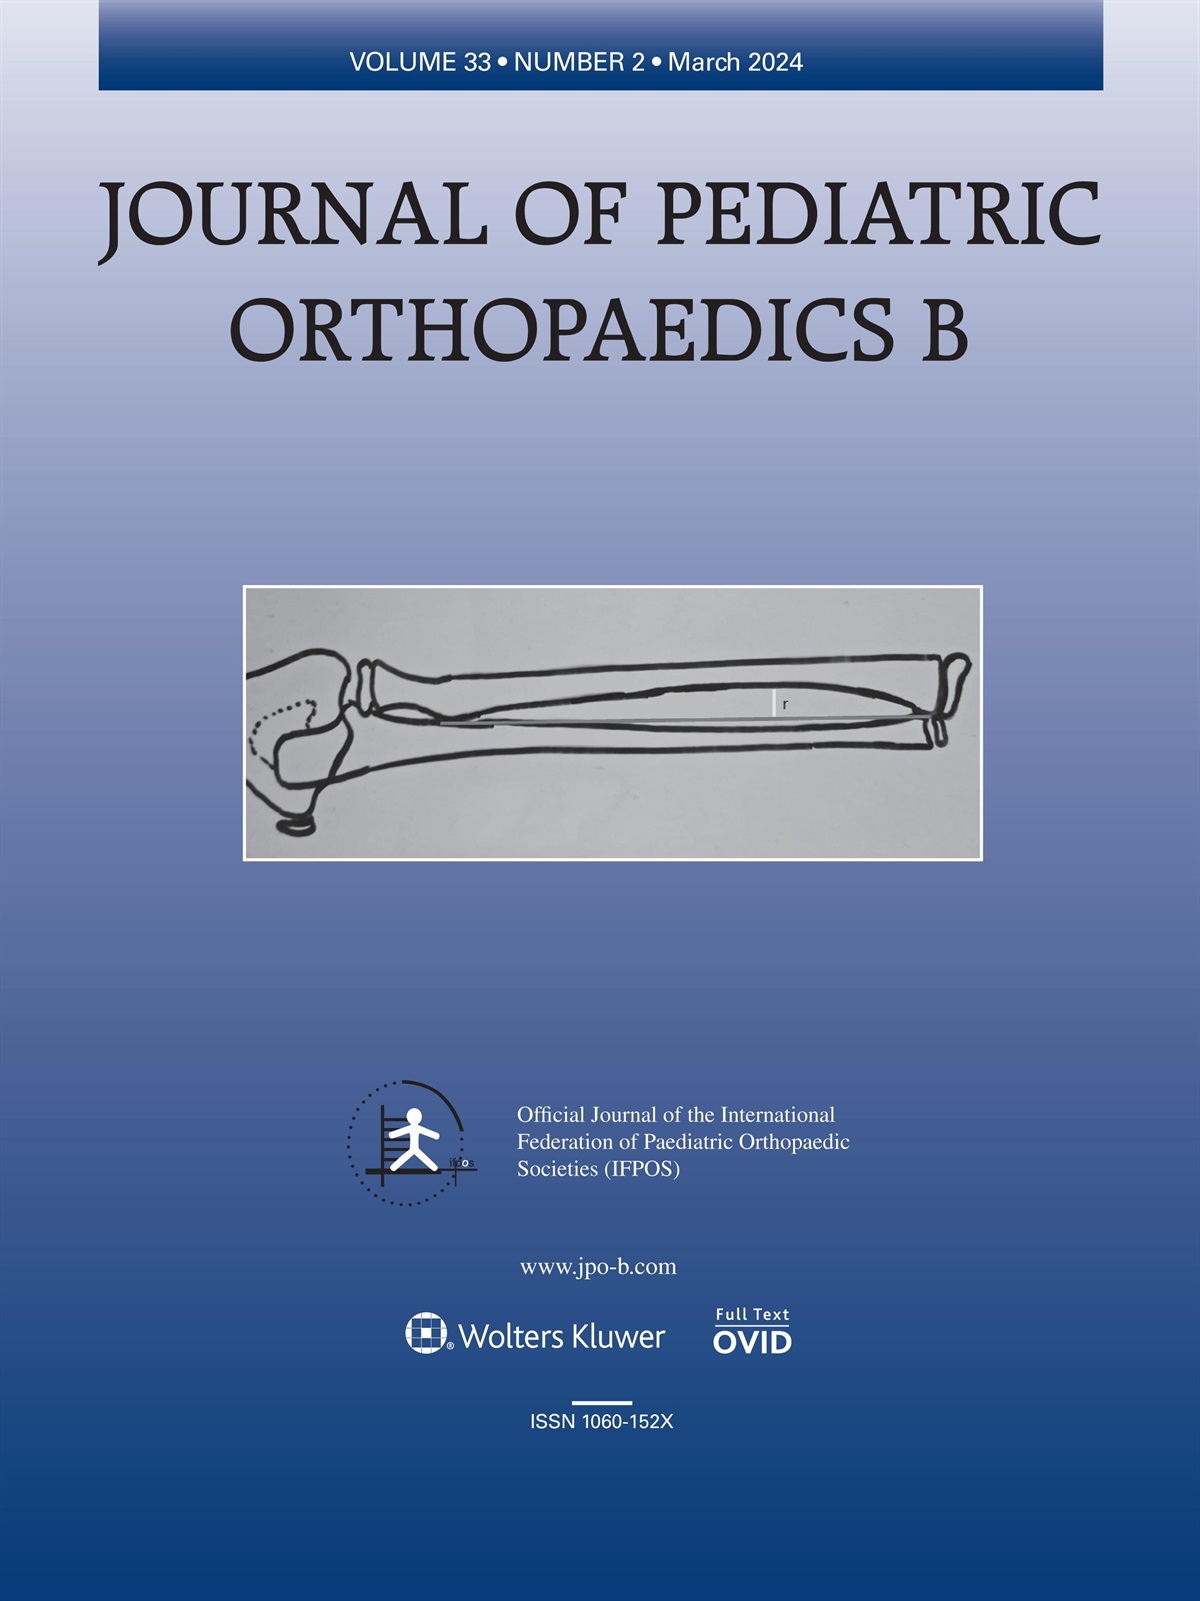 Reply to letter to editor regarding the article: ‘Use of lateral-exit crossed-pin fixation for pediatric supracondylar humeral fractures: a retrospective case series’